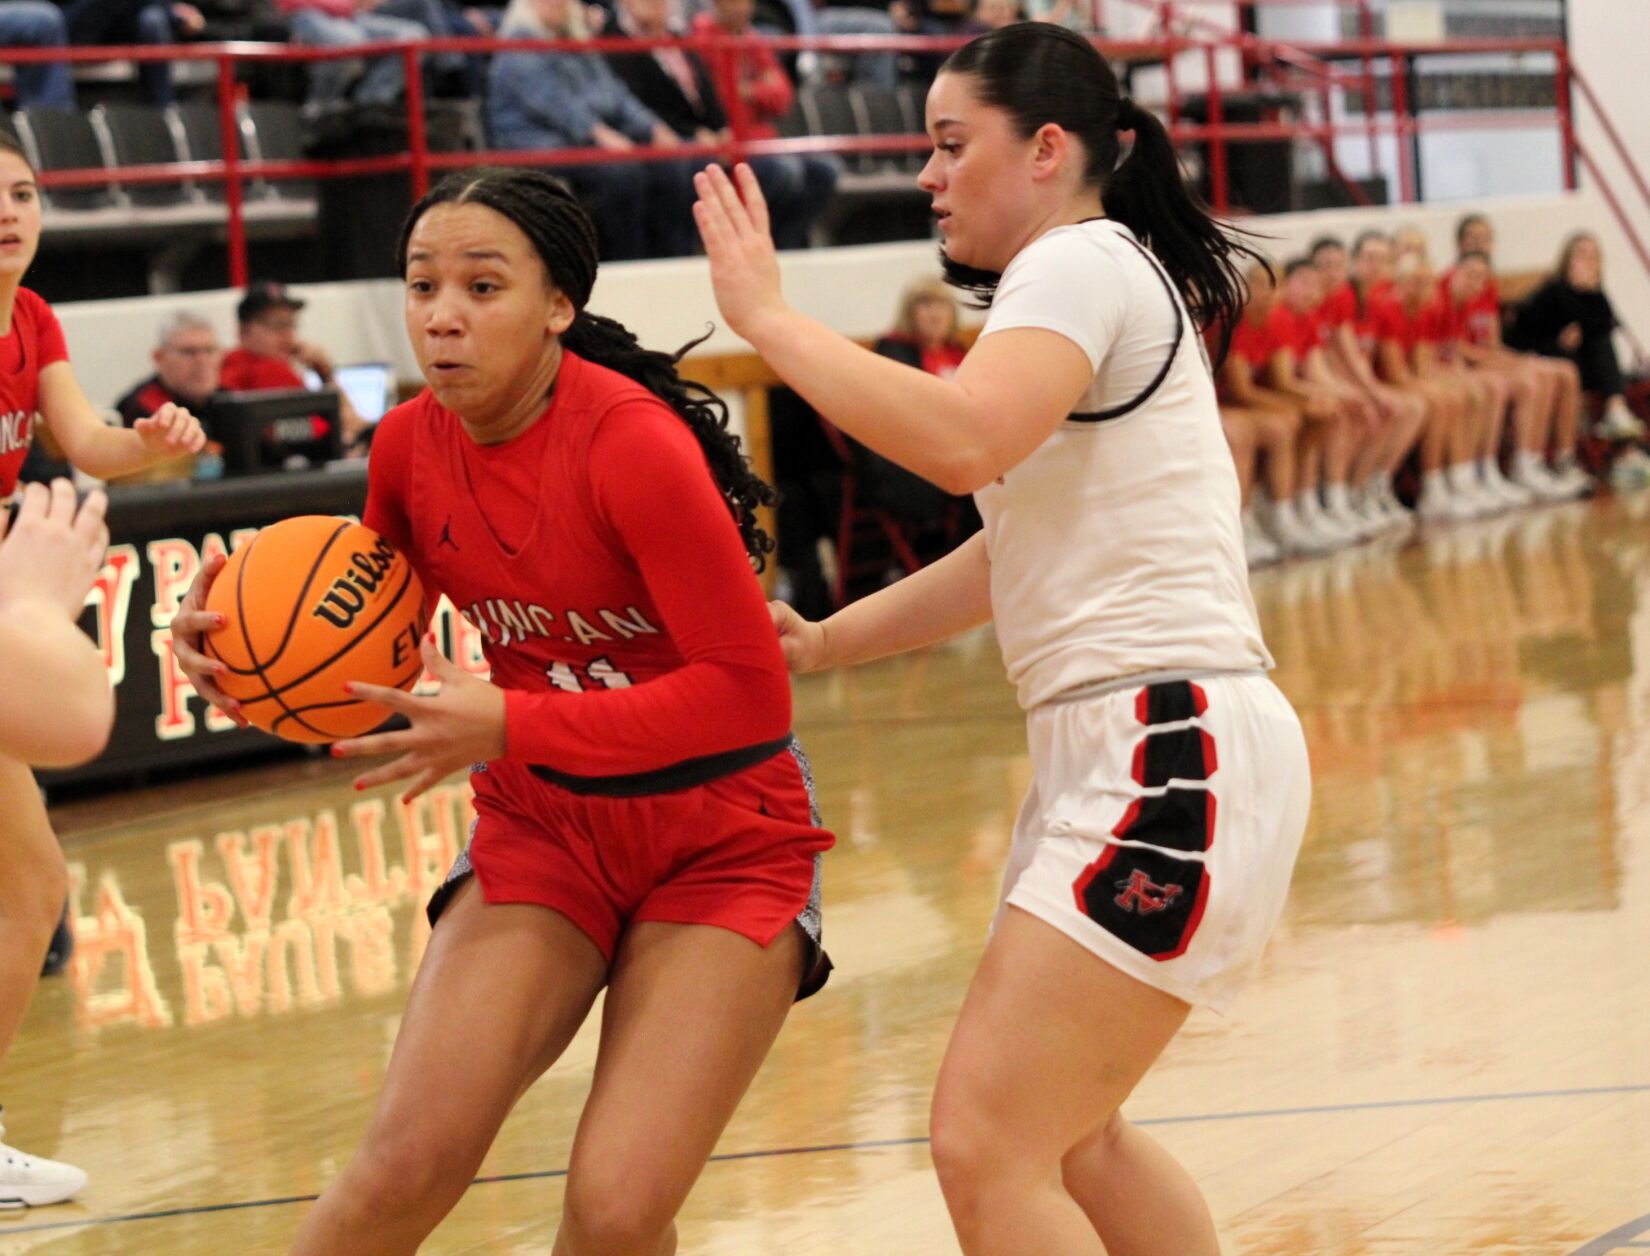 Lady Demons Secure Playoff Victory and Surpass 20-Win Season Milestone with Stellar Defense